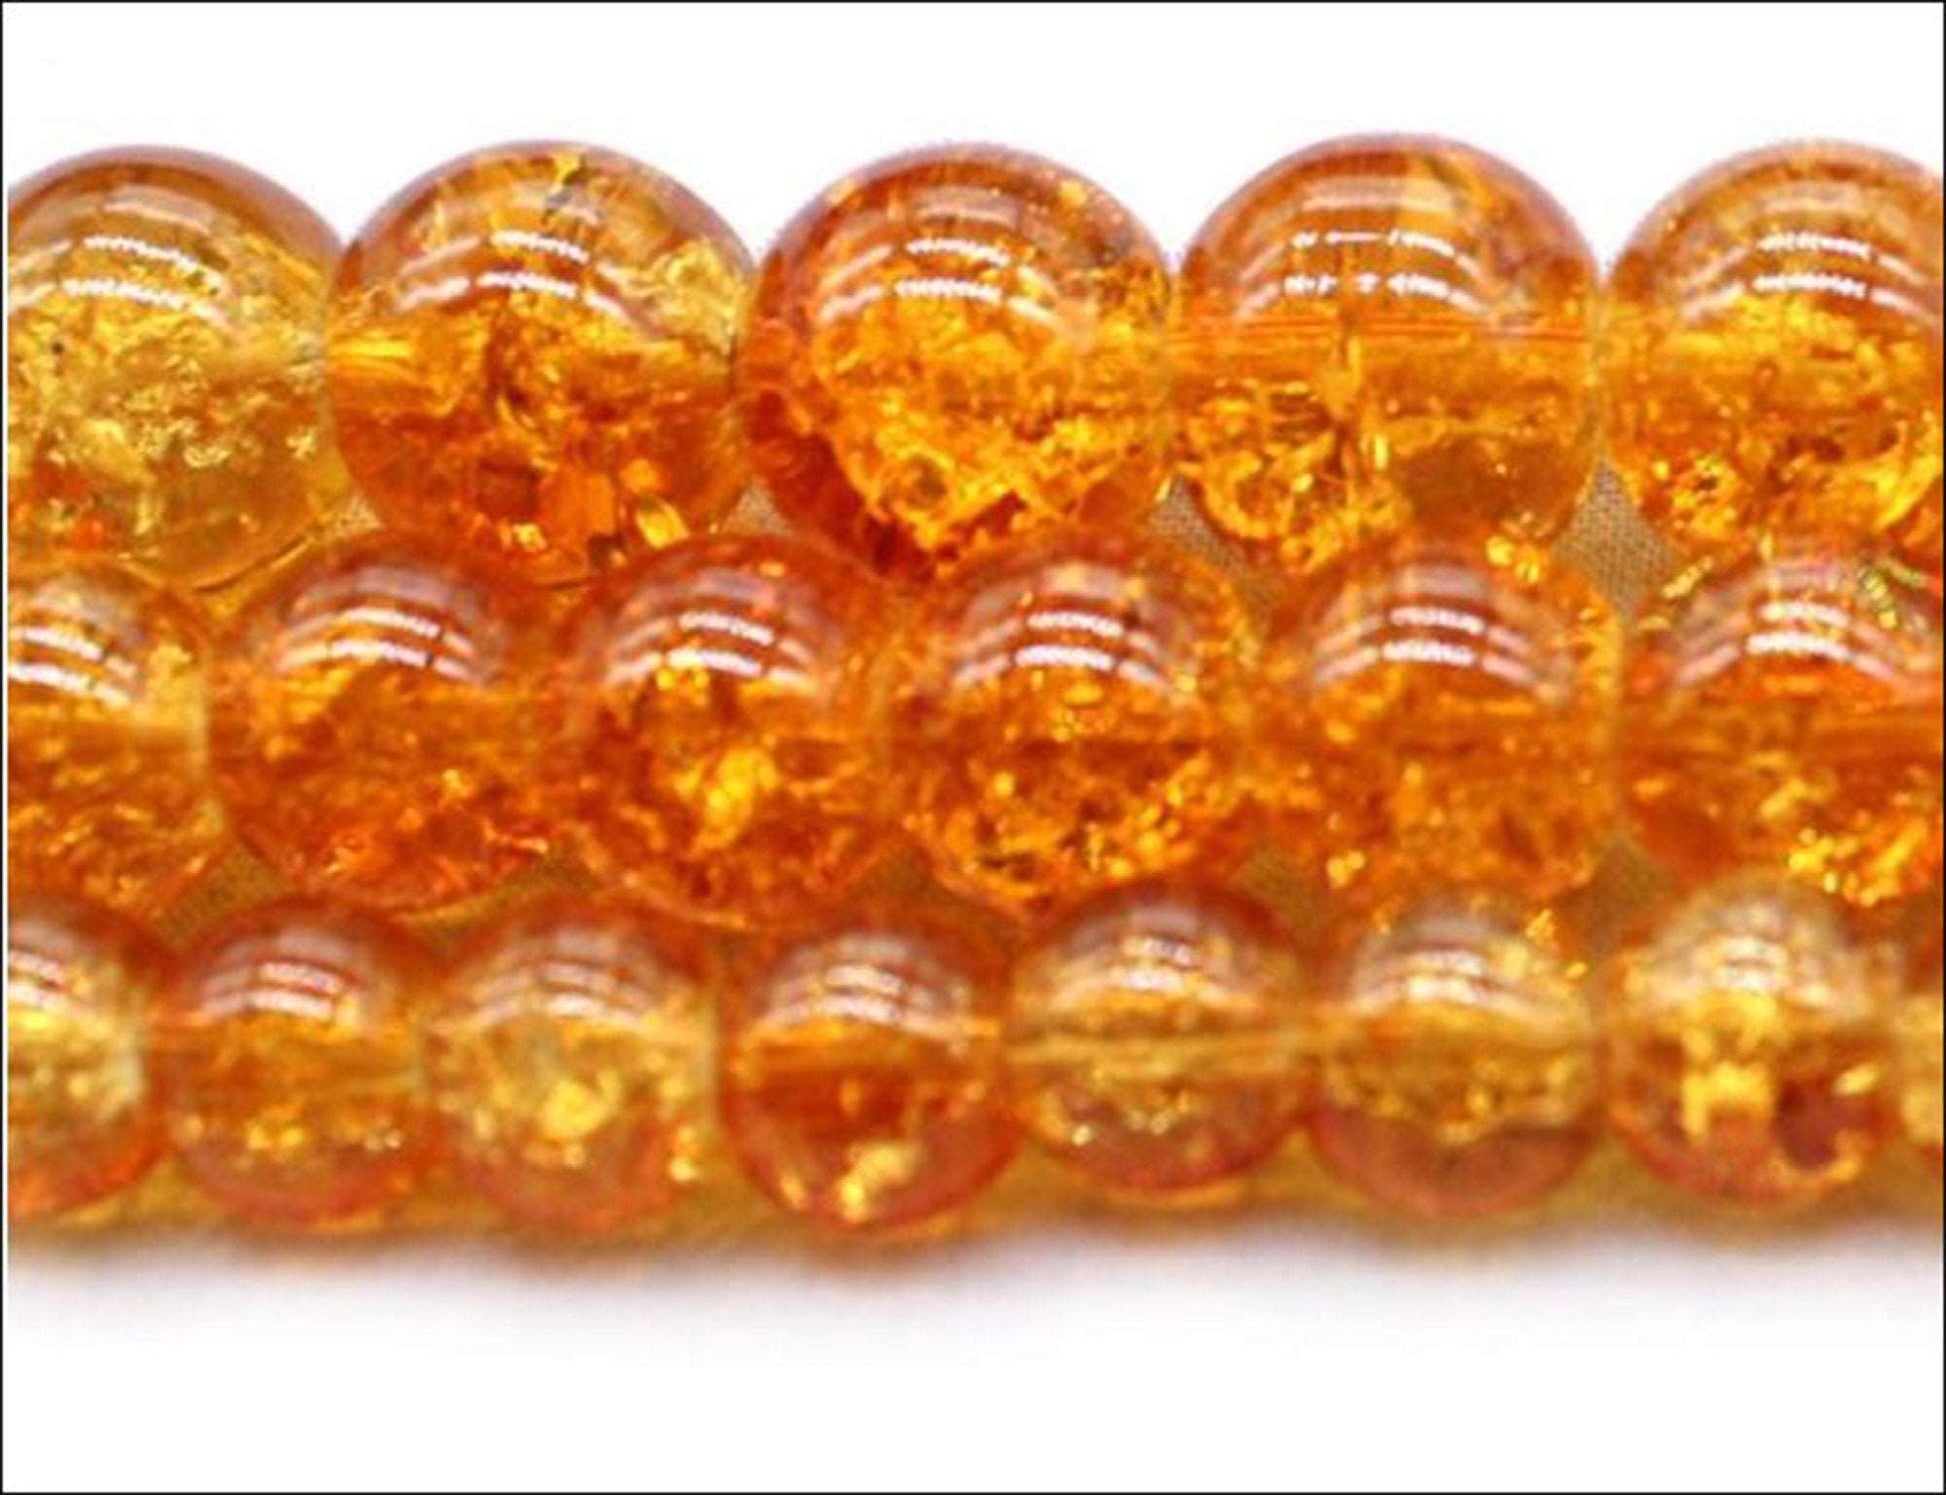 Genuine glass crackled glass bead 20/pkg. 9 colors - Providence silver gold jewelry usa